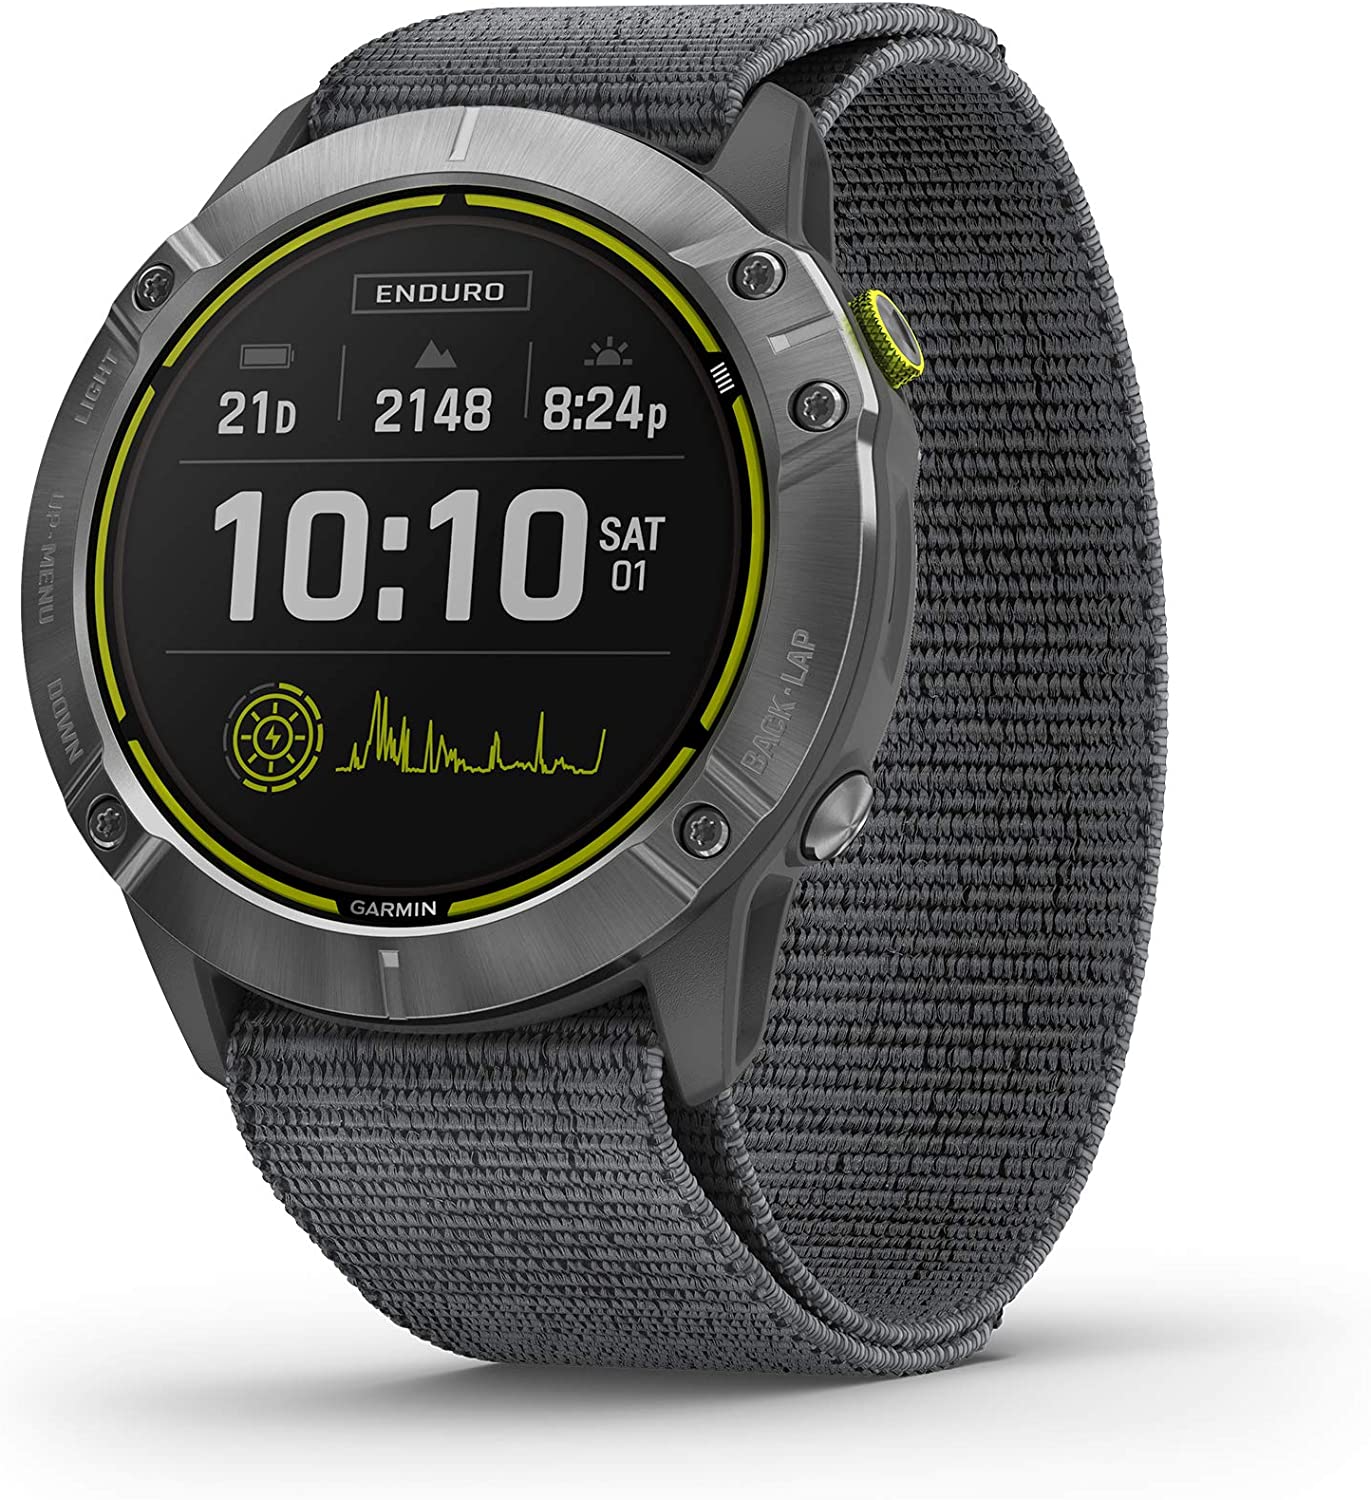 Garmin Enduro, Ultraperformance Multisport GPS Watch with Solar Charging Capabilities, Battery Life Up to 80 Hours in GPS Mode, Steel with Gray UltraFit Nylon Band